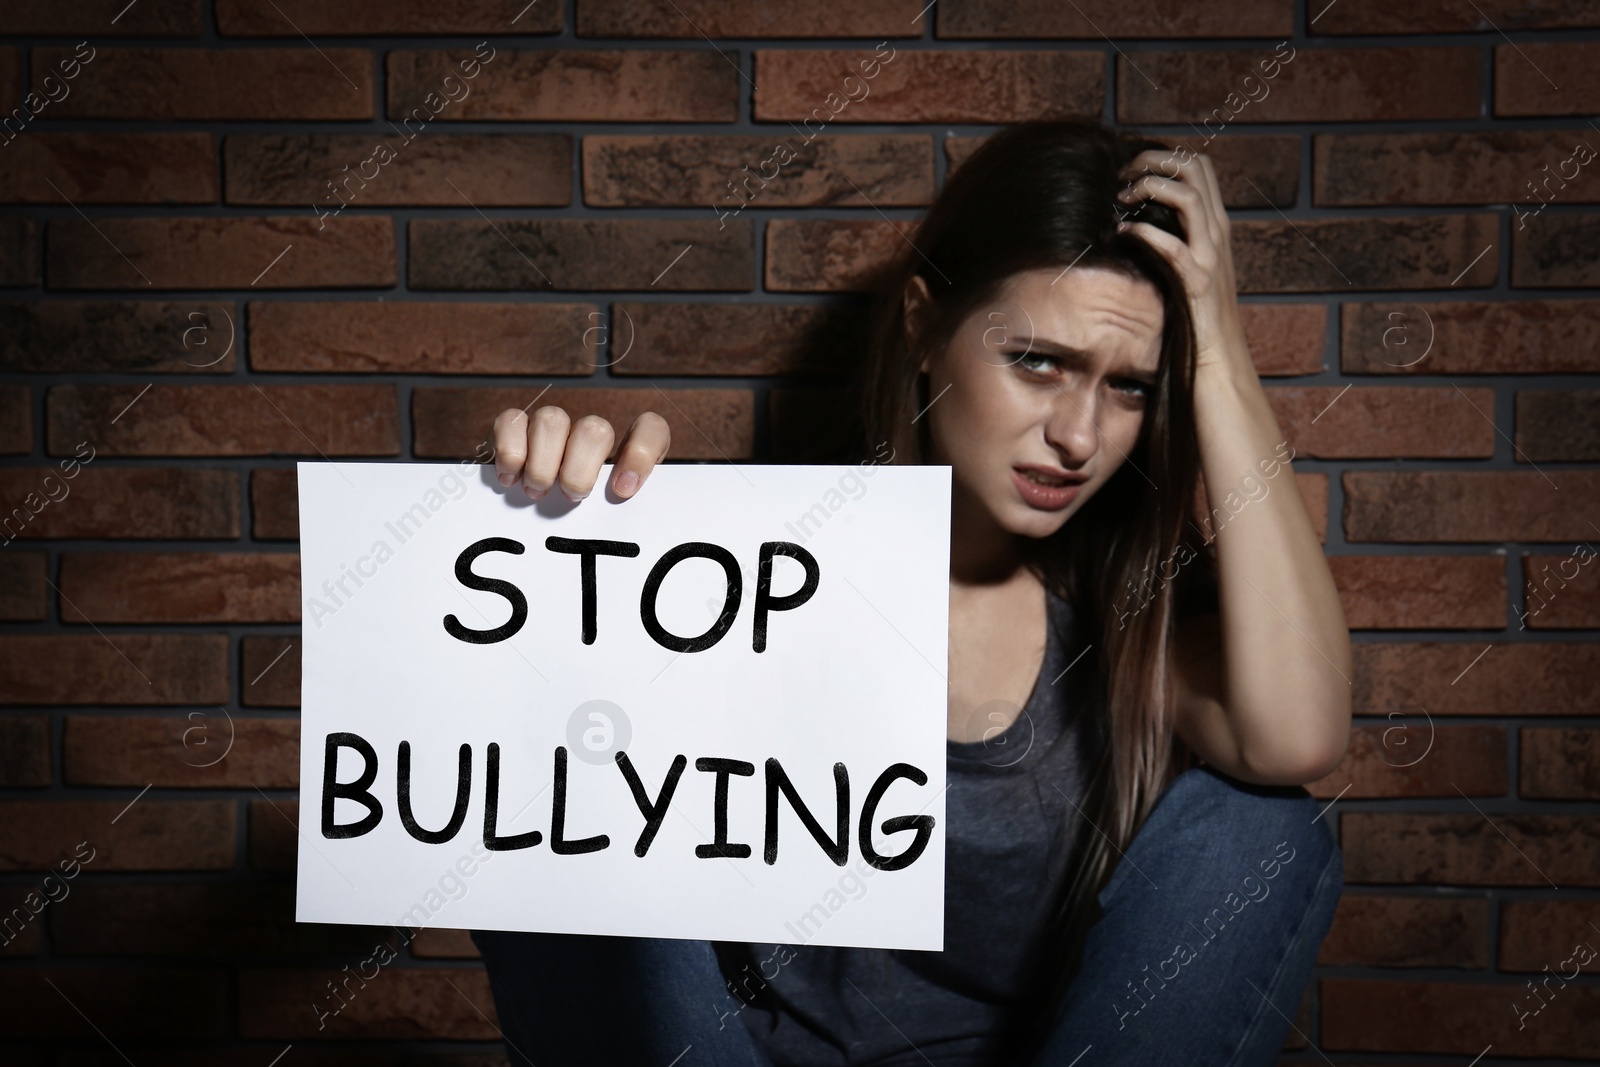 Image of Abused teen girl with sign STOP BULLYING near brick wall